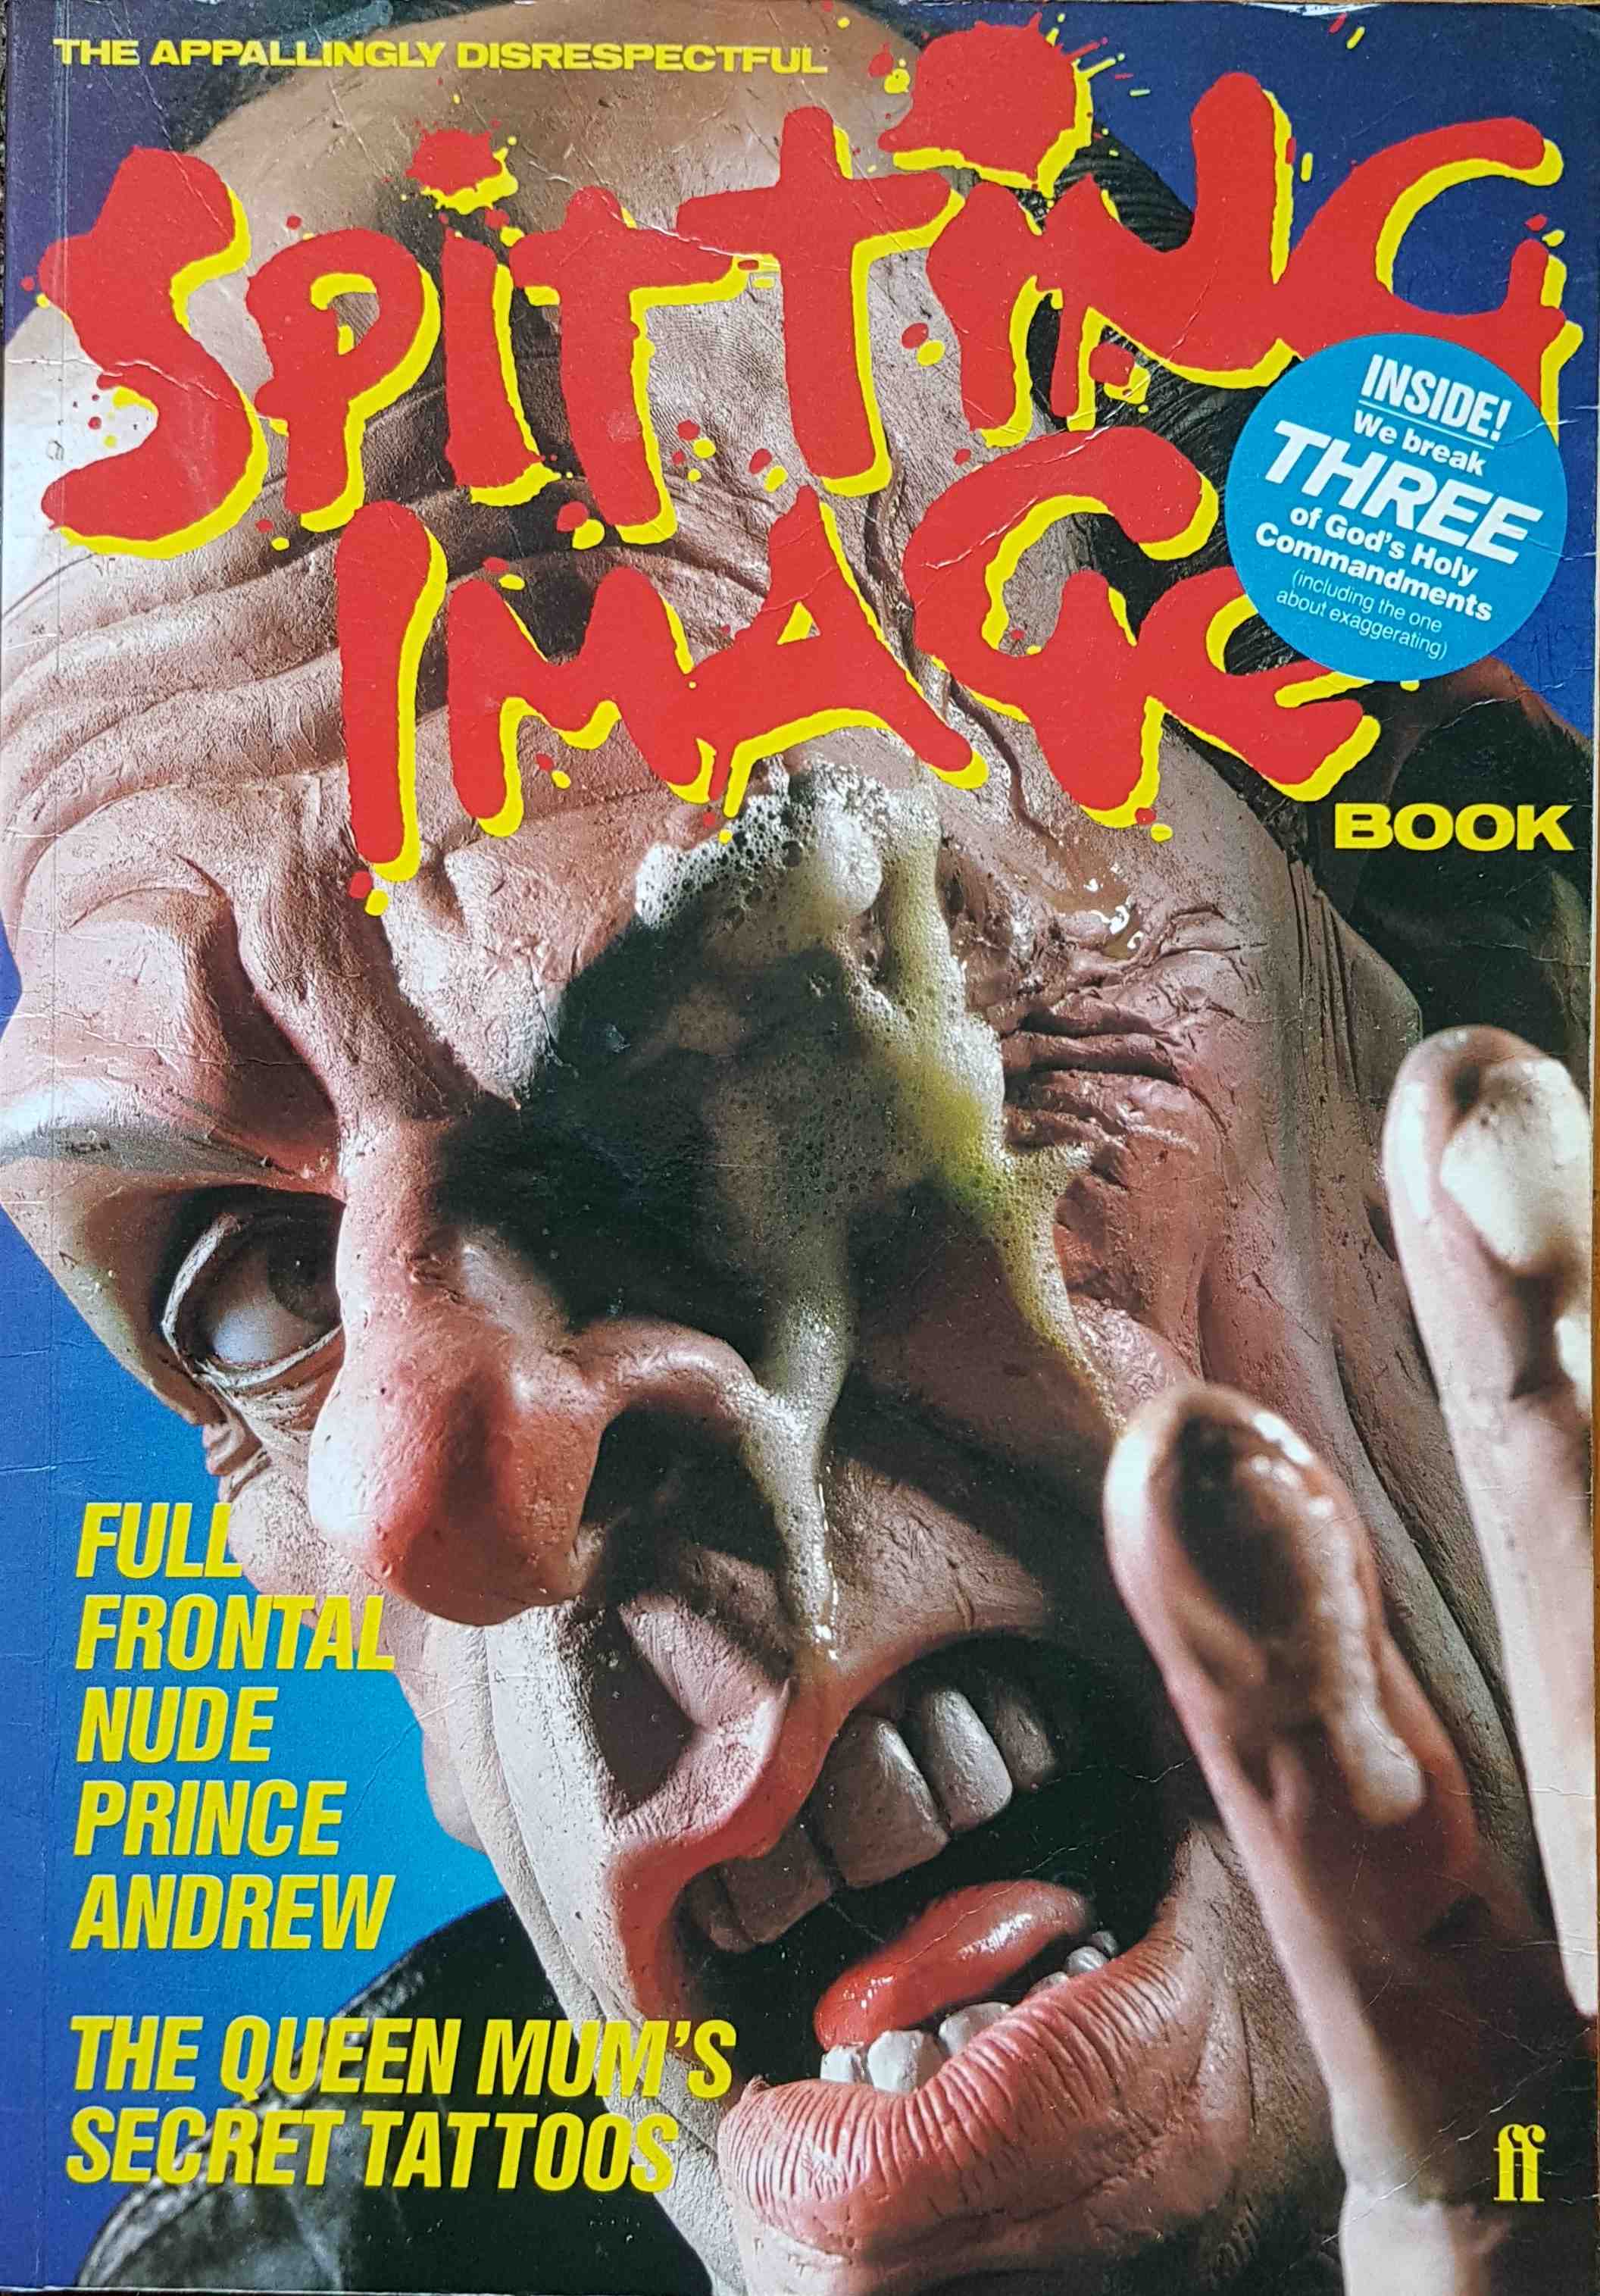 Picture of Spitting image book by artist Various from ITV, Channel 4 and Channel 5 books library